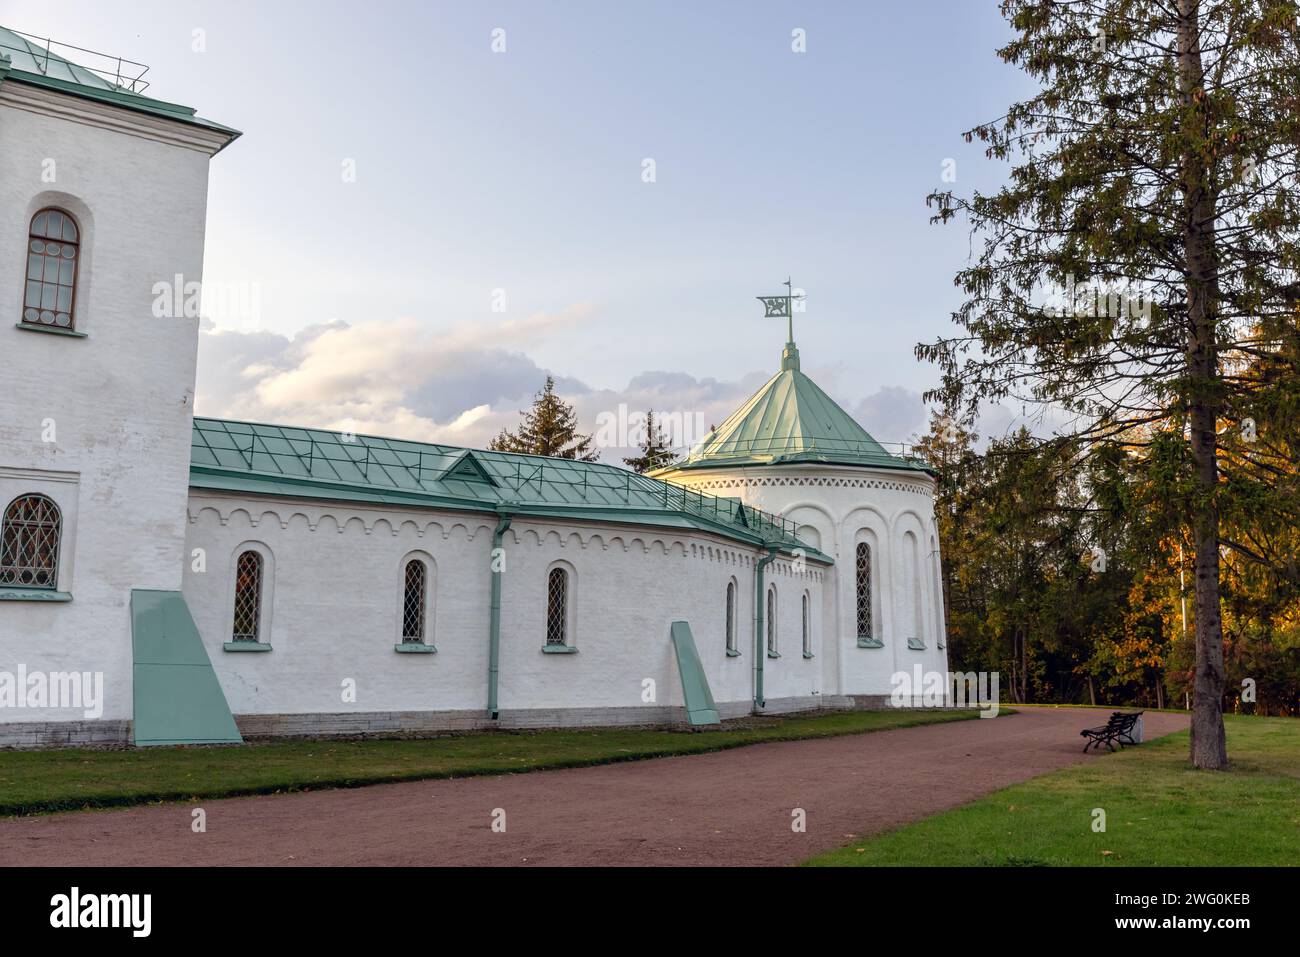 Exterior of Ratnaya Palata in Tsarskoye Selo, Russia. The building was erected in 1913 to resemble an Old Russian fort and contain a museum of Russian Stock Photo